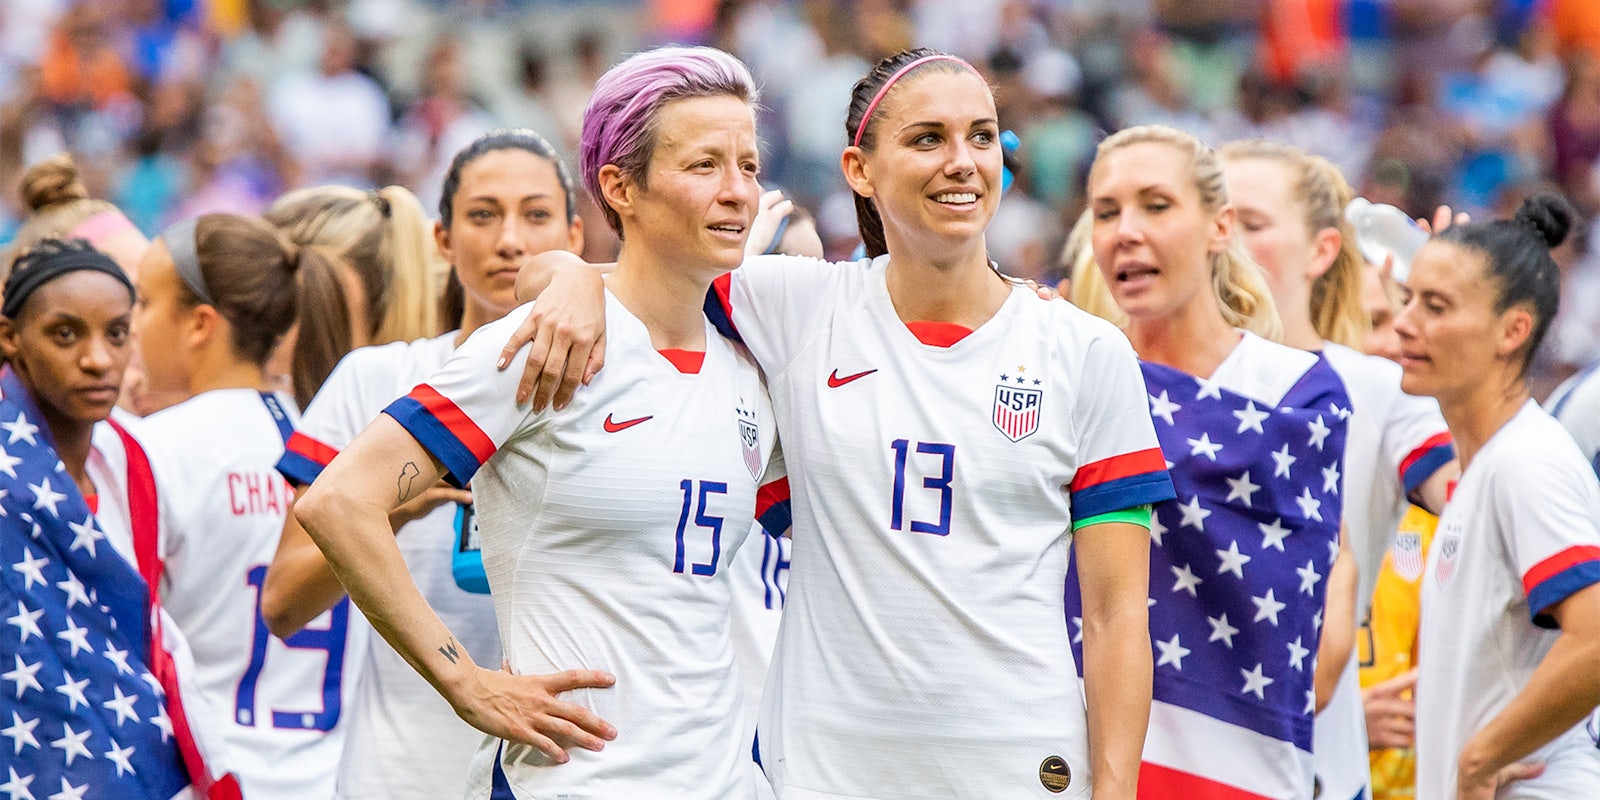 Megan Rapinoe and Alex Morgan of the USWNT are seen after the 2019 FIFA Women's World Cup Final match between USA and Netherlands.